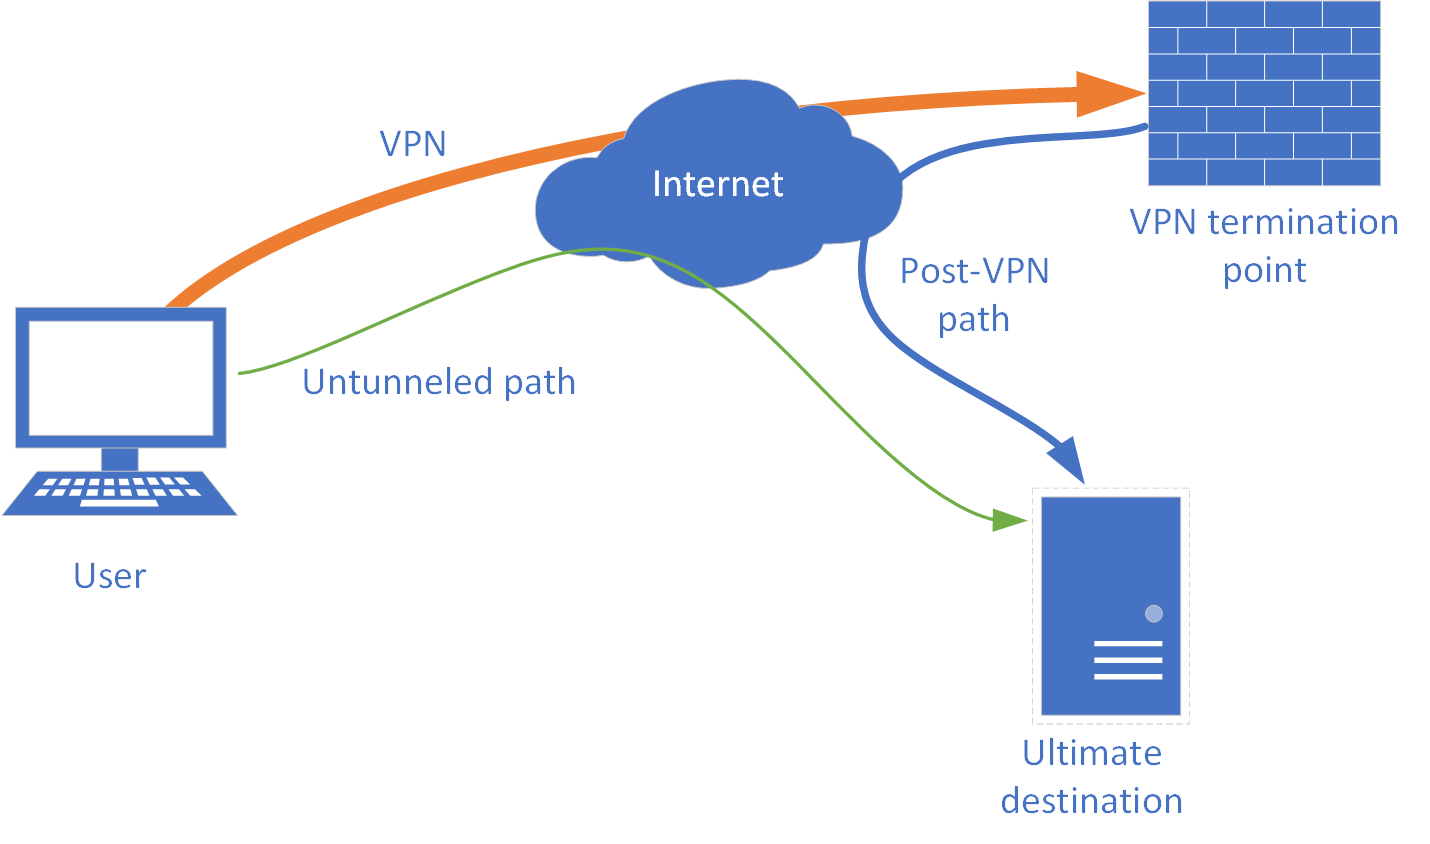 vpn tunneling definitions